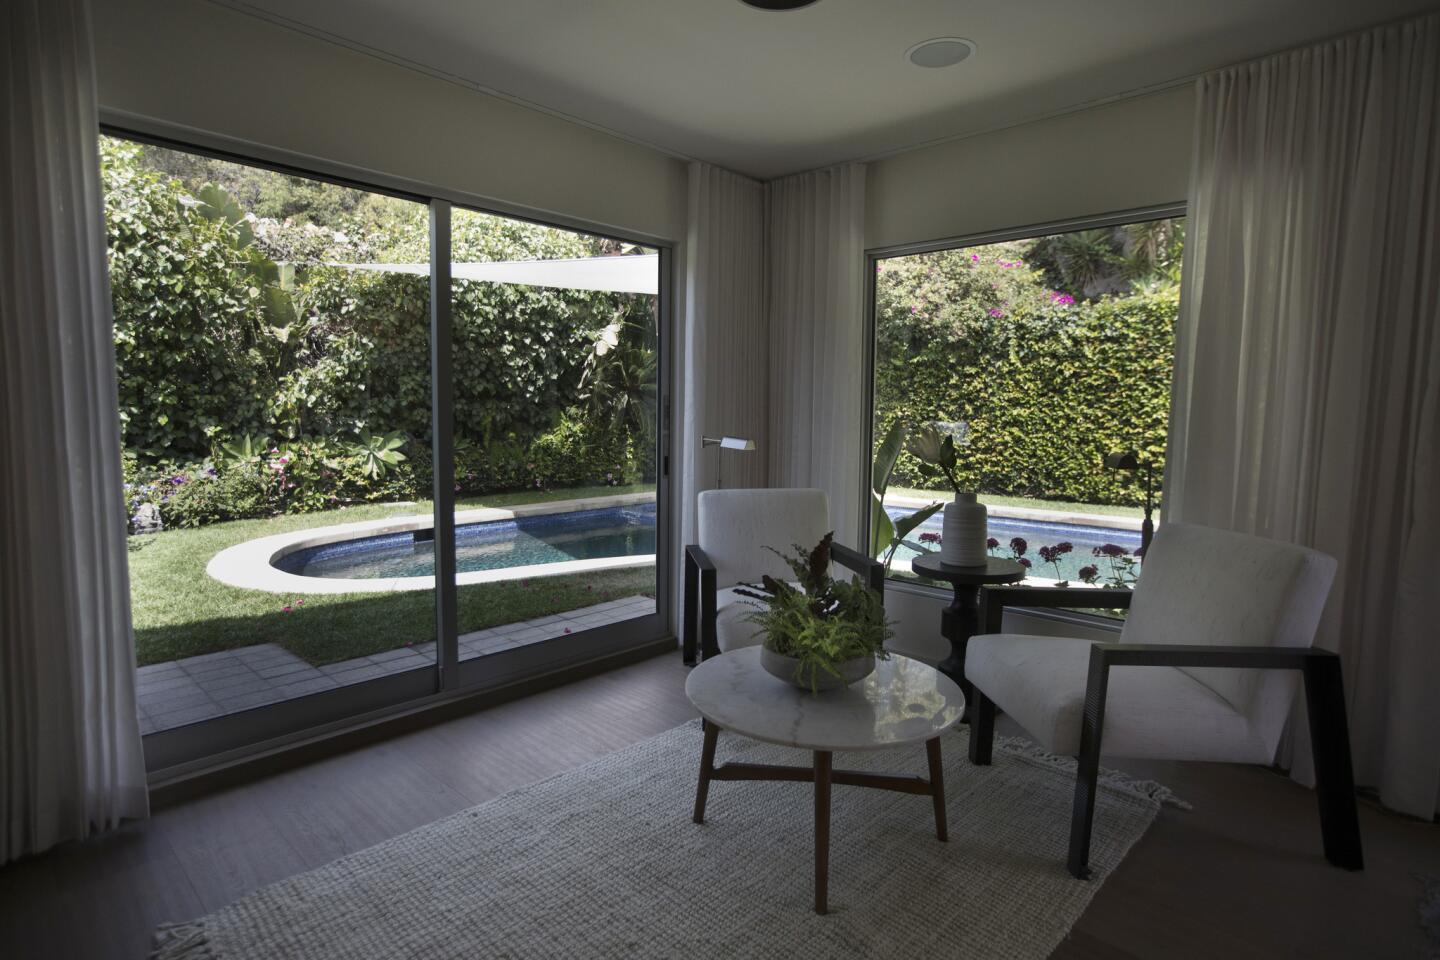 A lounge located off of the dining room connects the interiors to the outdoors at the Sunset Idea House in Beverly Hills.